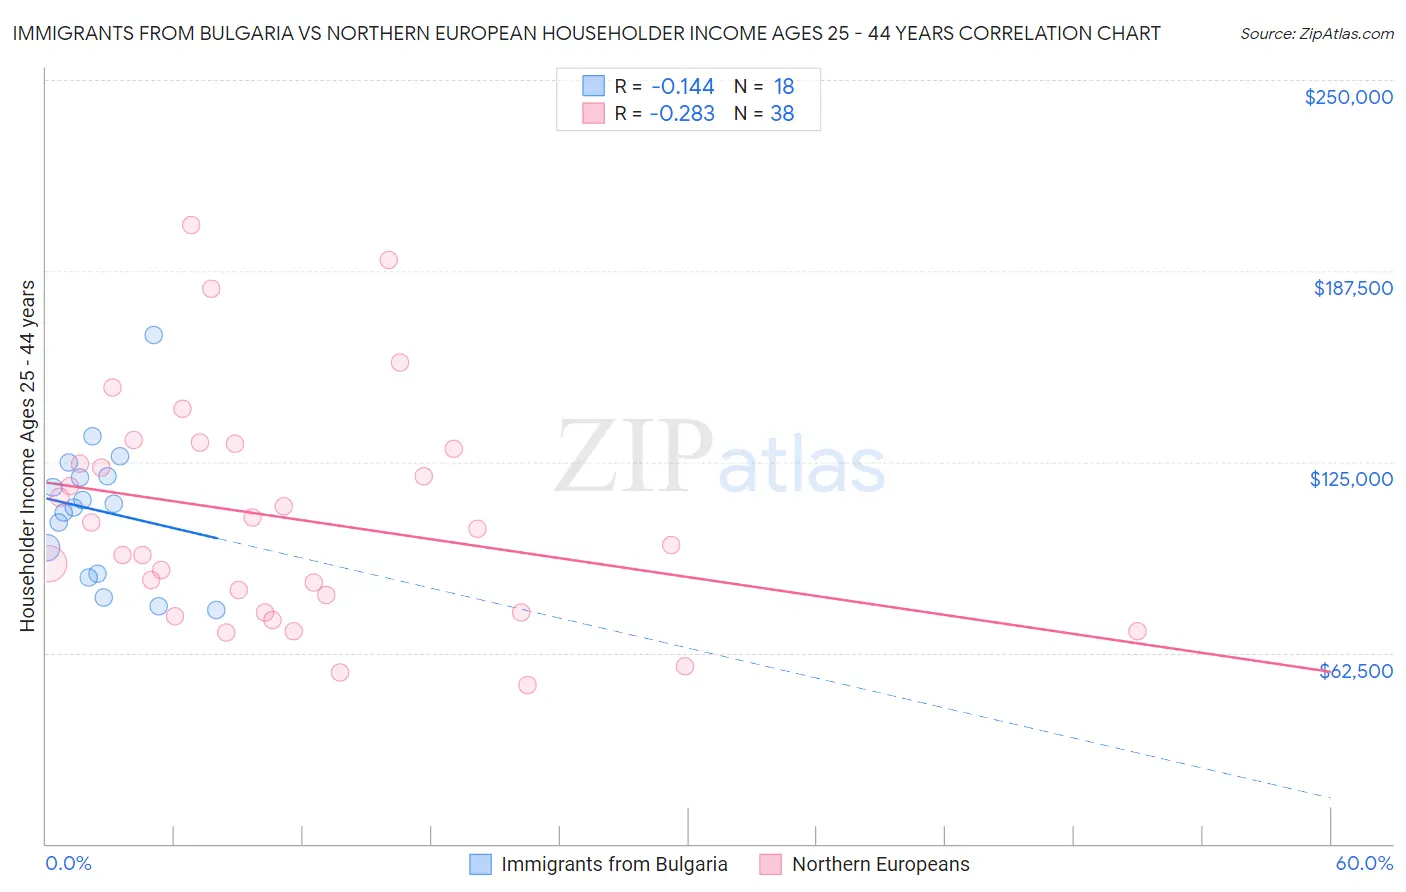 Immigrants from Bulgaria vs Northern European Householder Income Ages 25 - 44 years